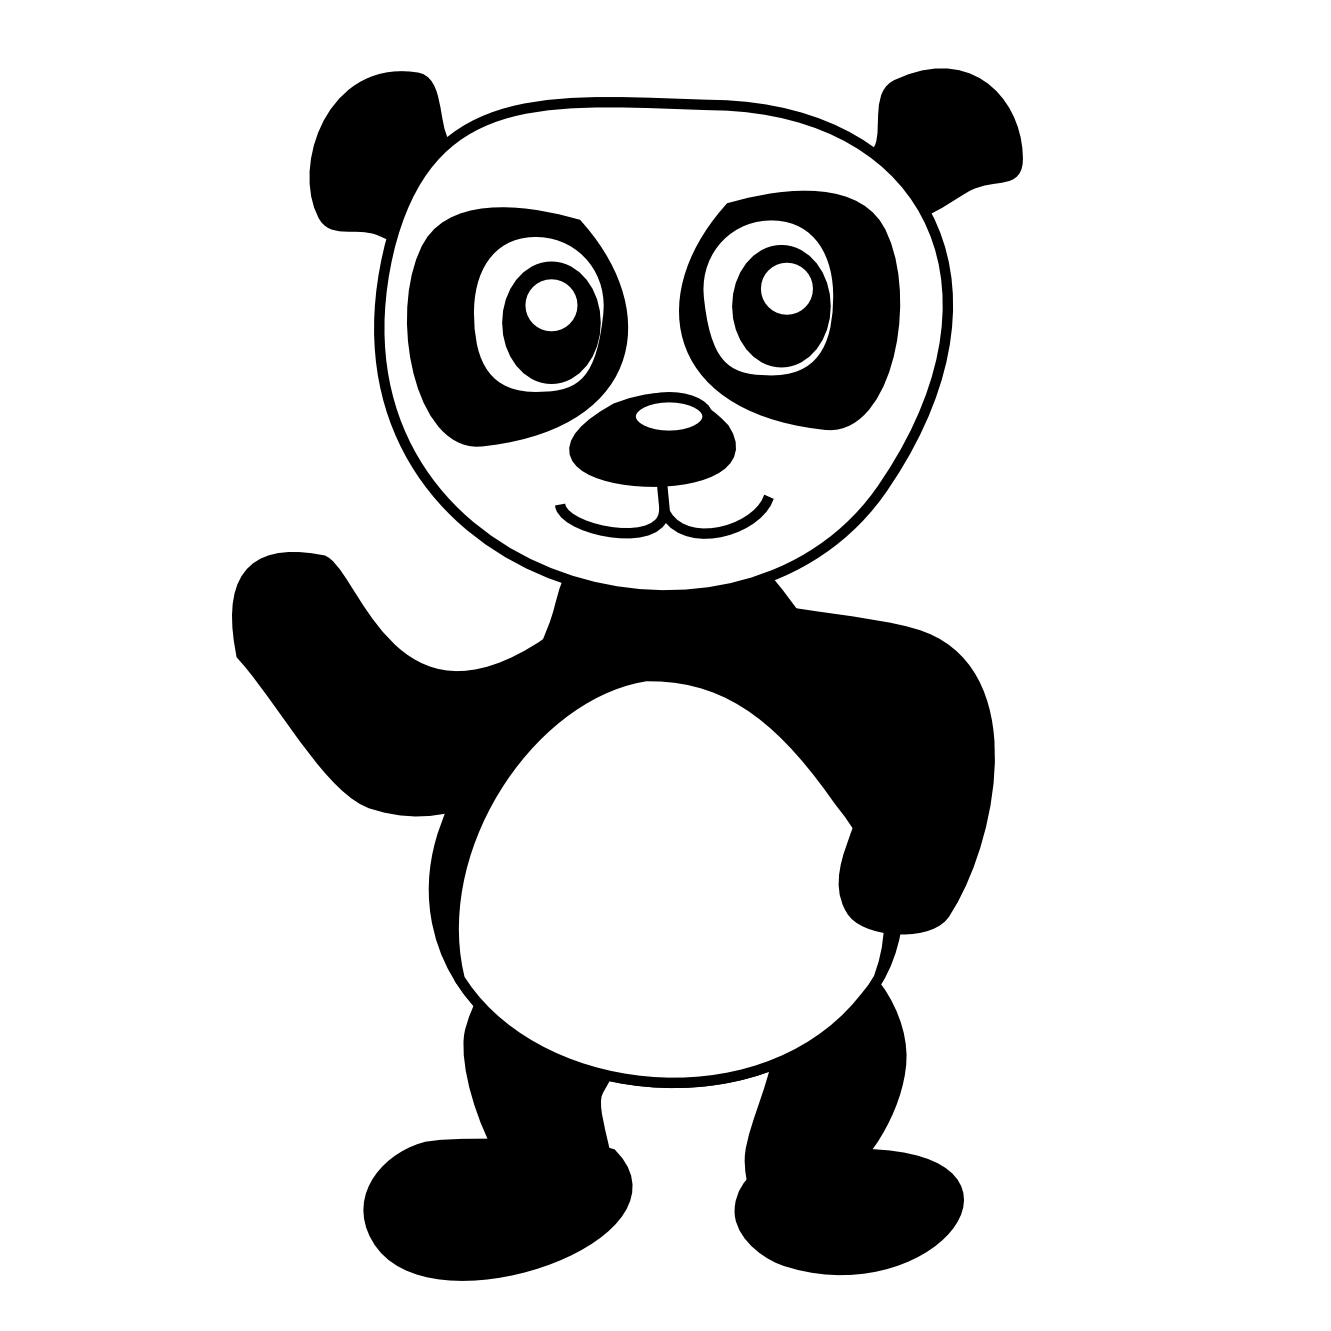 Panda bear coloring pages to download and print for free